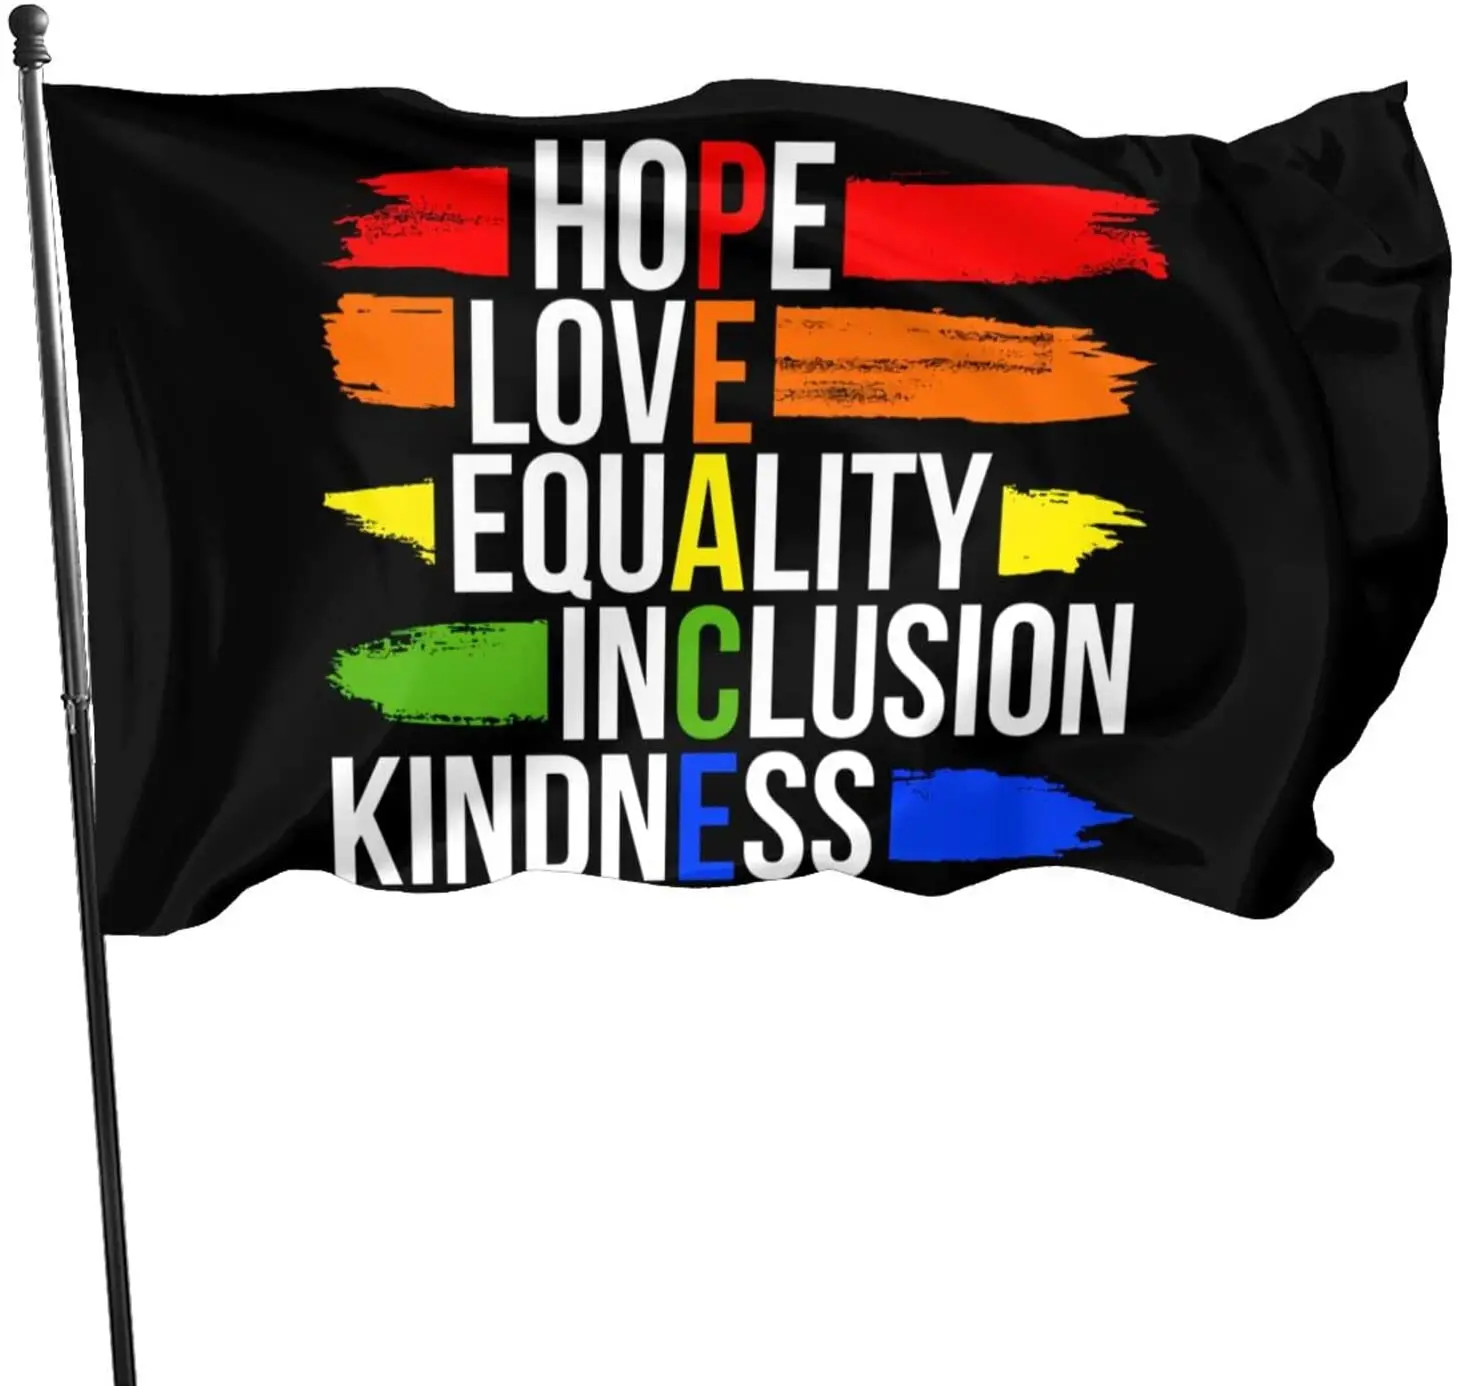 

Kindness Peace Equality Love Inclusion Hope Diversity Flag Indoor Outdoor Decoration Banner With Brass Grommets